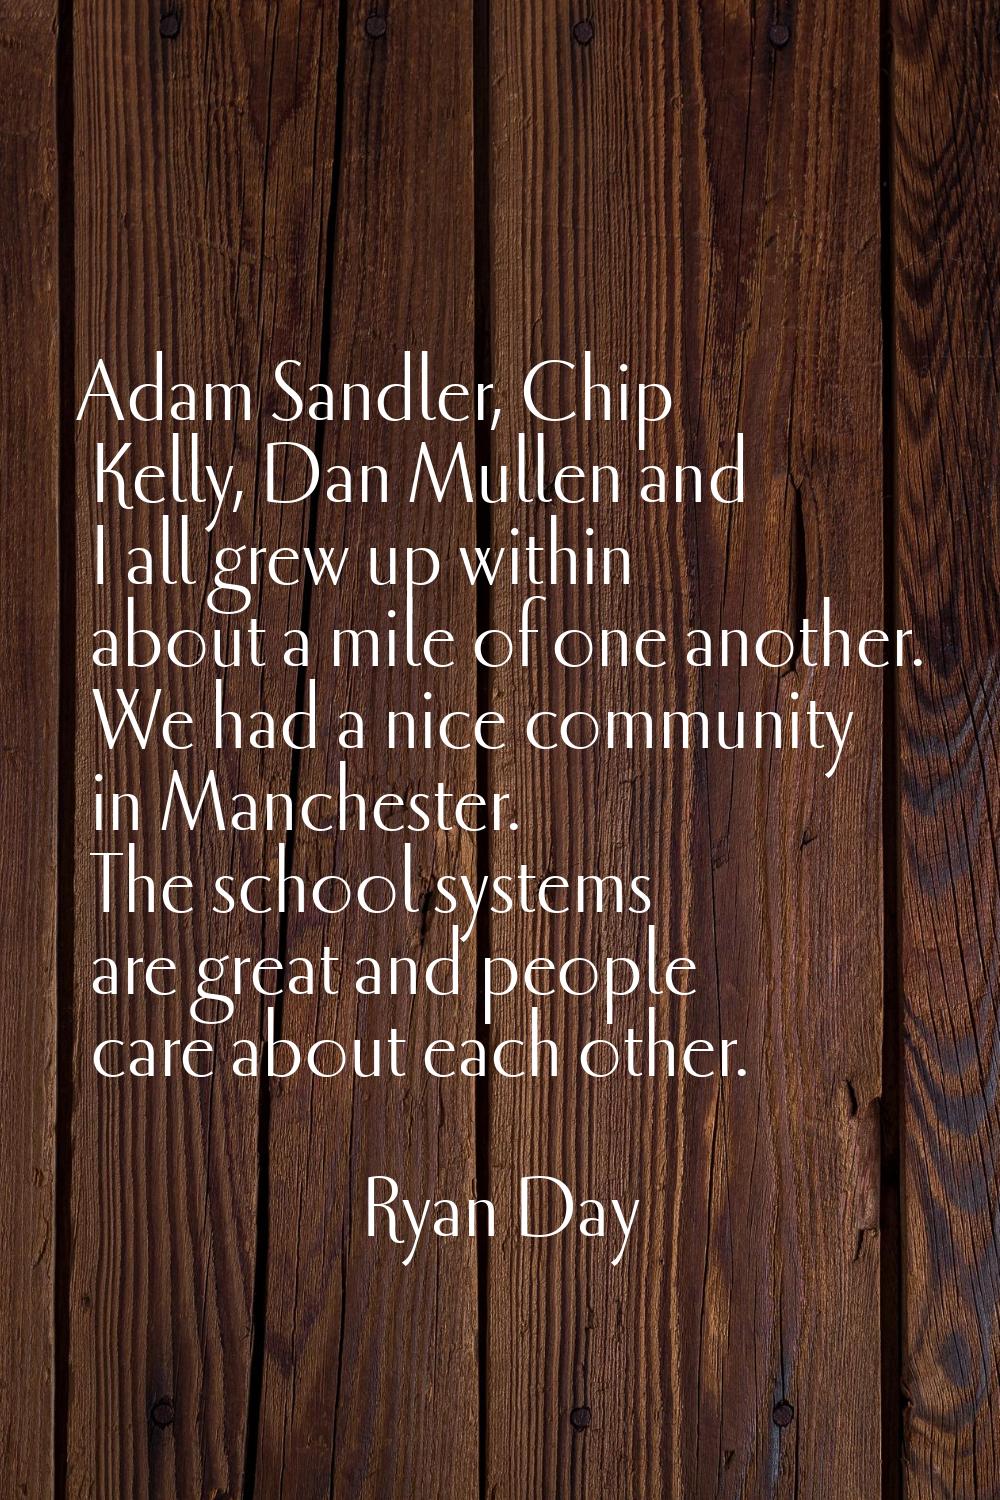 Adam Sandler, Chip Kelly, Dan Mullen and I all grew up within about a mile of one another. We had a